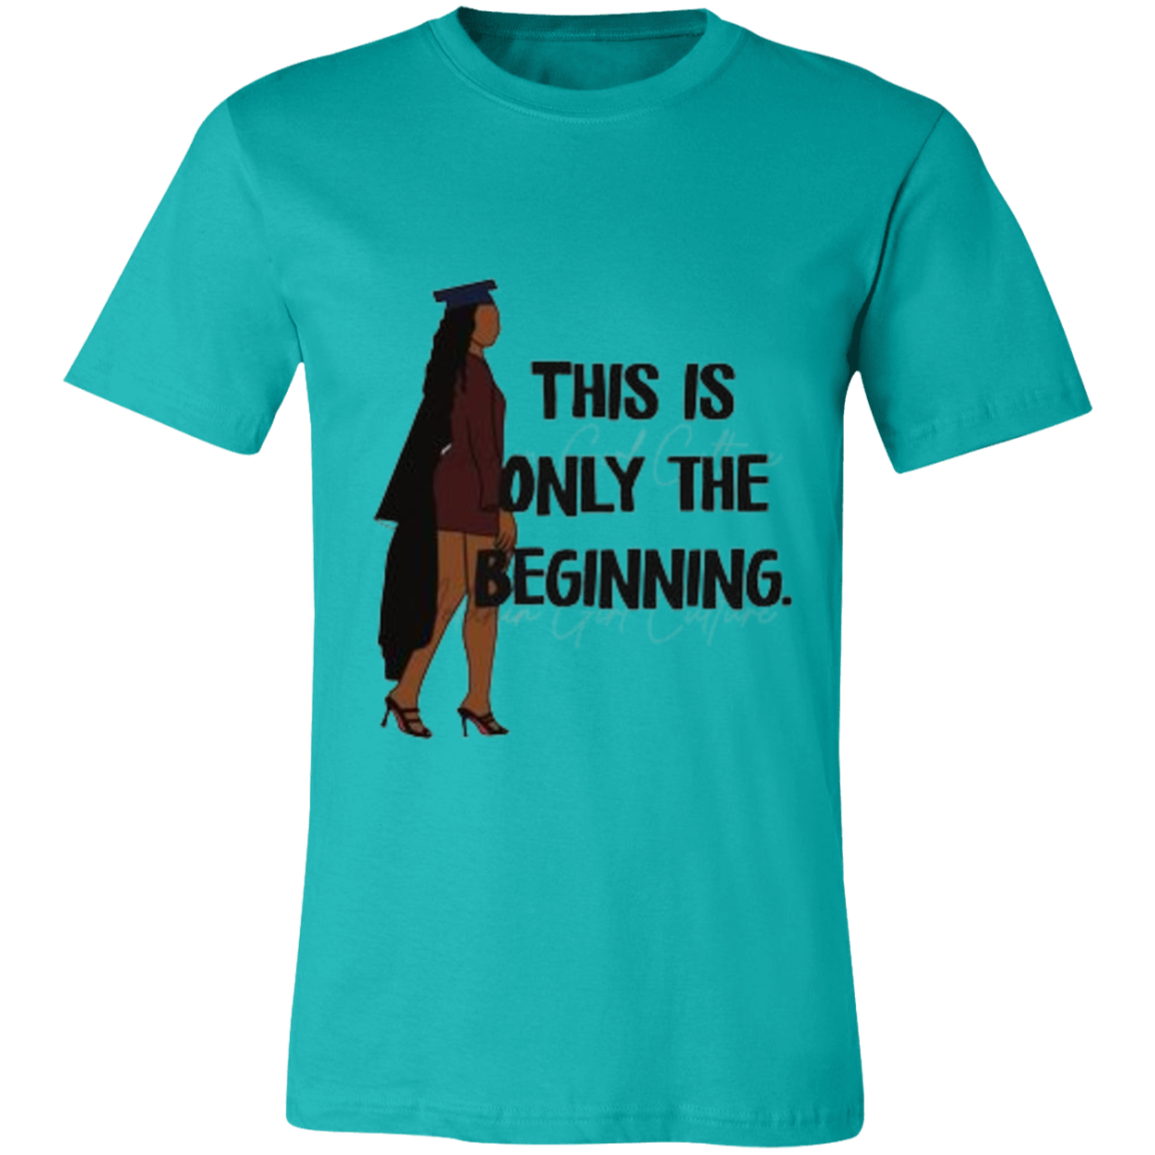 This Is Only the Beginning Jersey Short-Sleeve T-Shirt